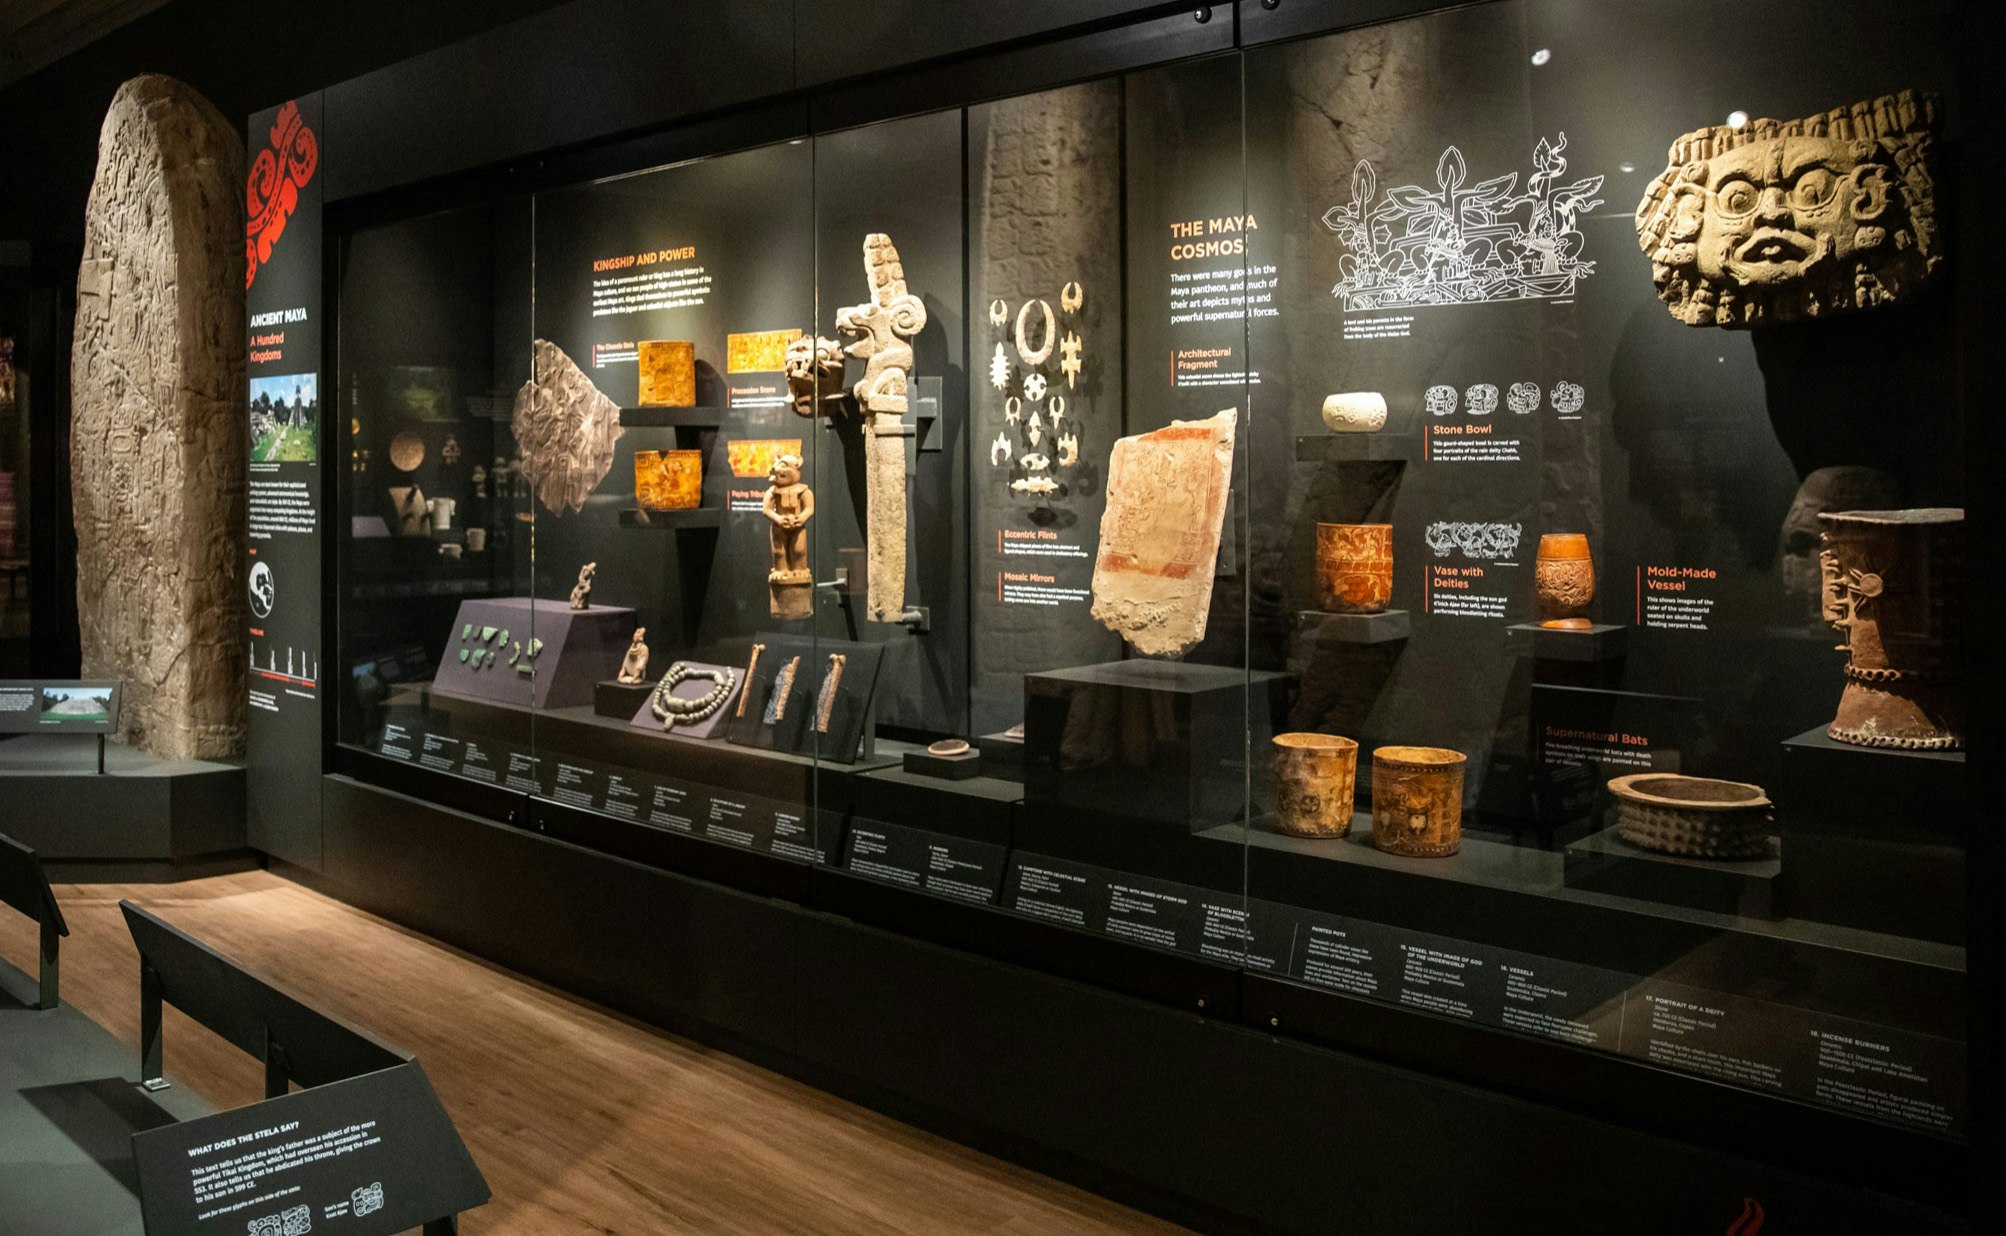 A glass exhibit case showcases artifacts from Mesoamerica at the Penn Museum in Philadelphia